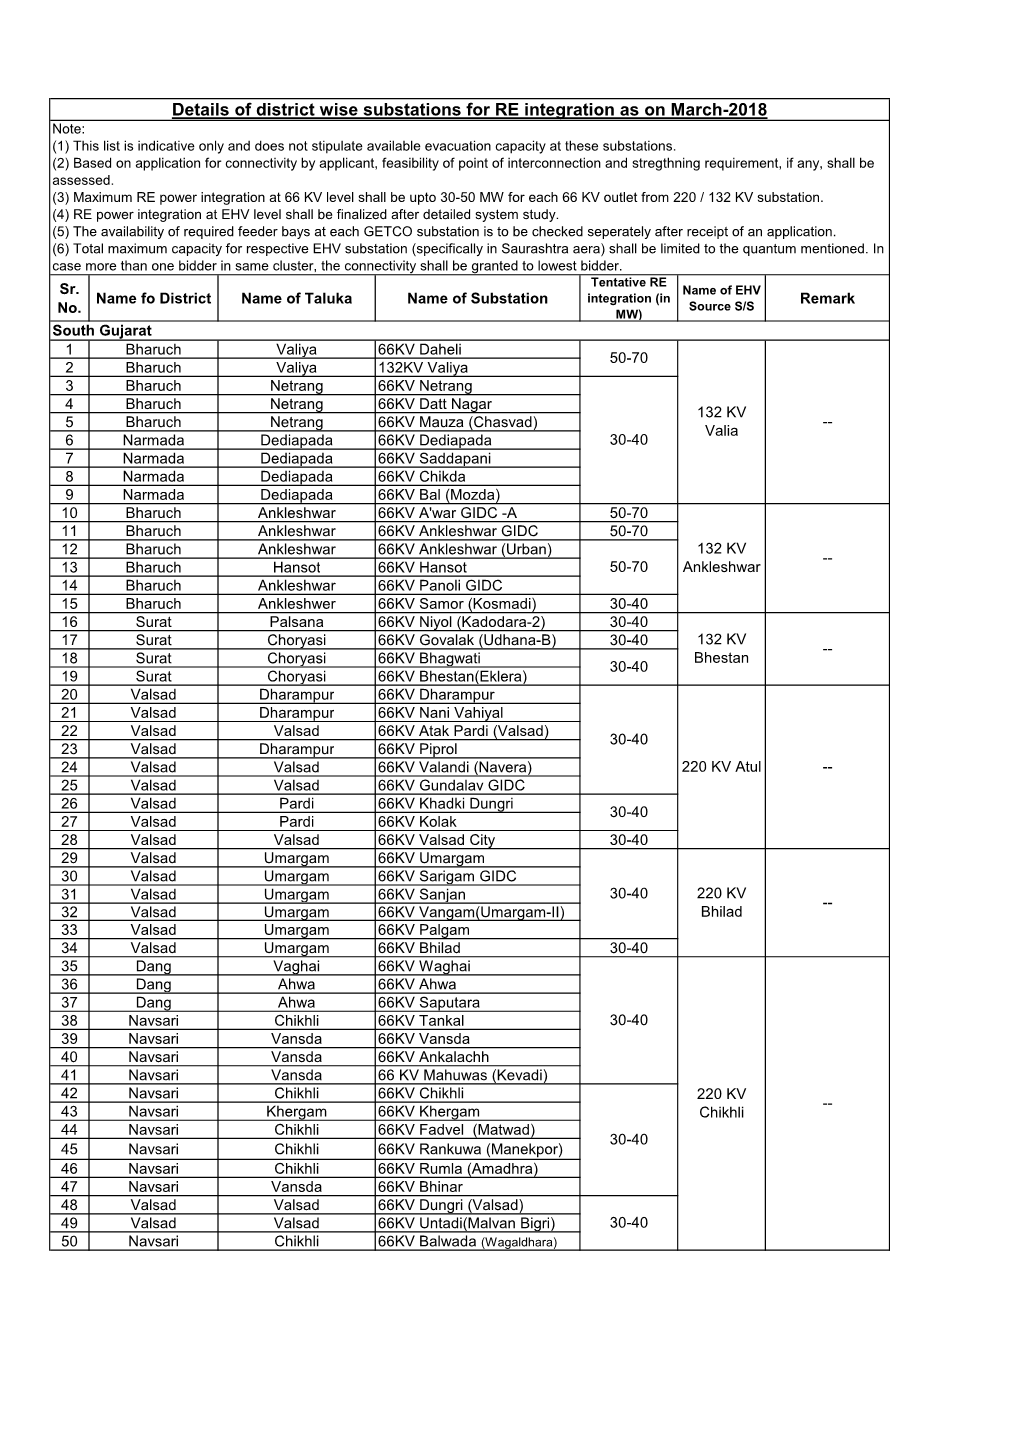 Details of District Wise Substations for RE Integration As On